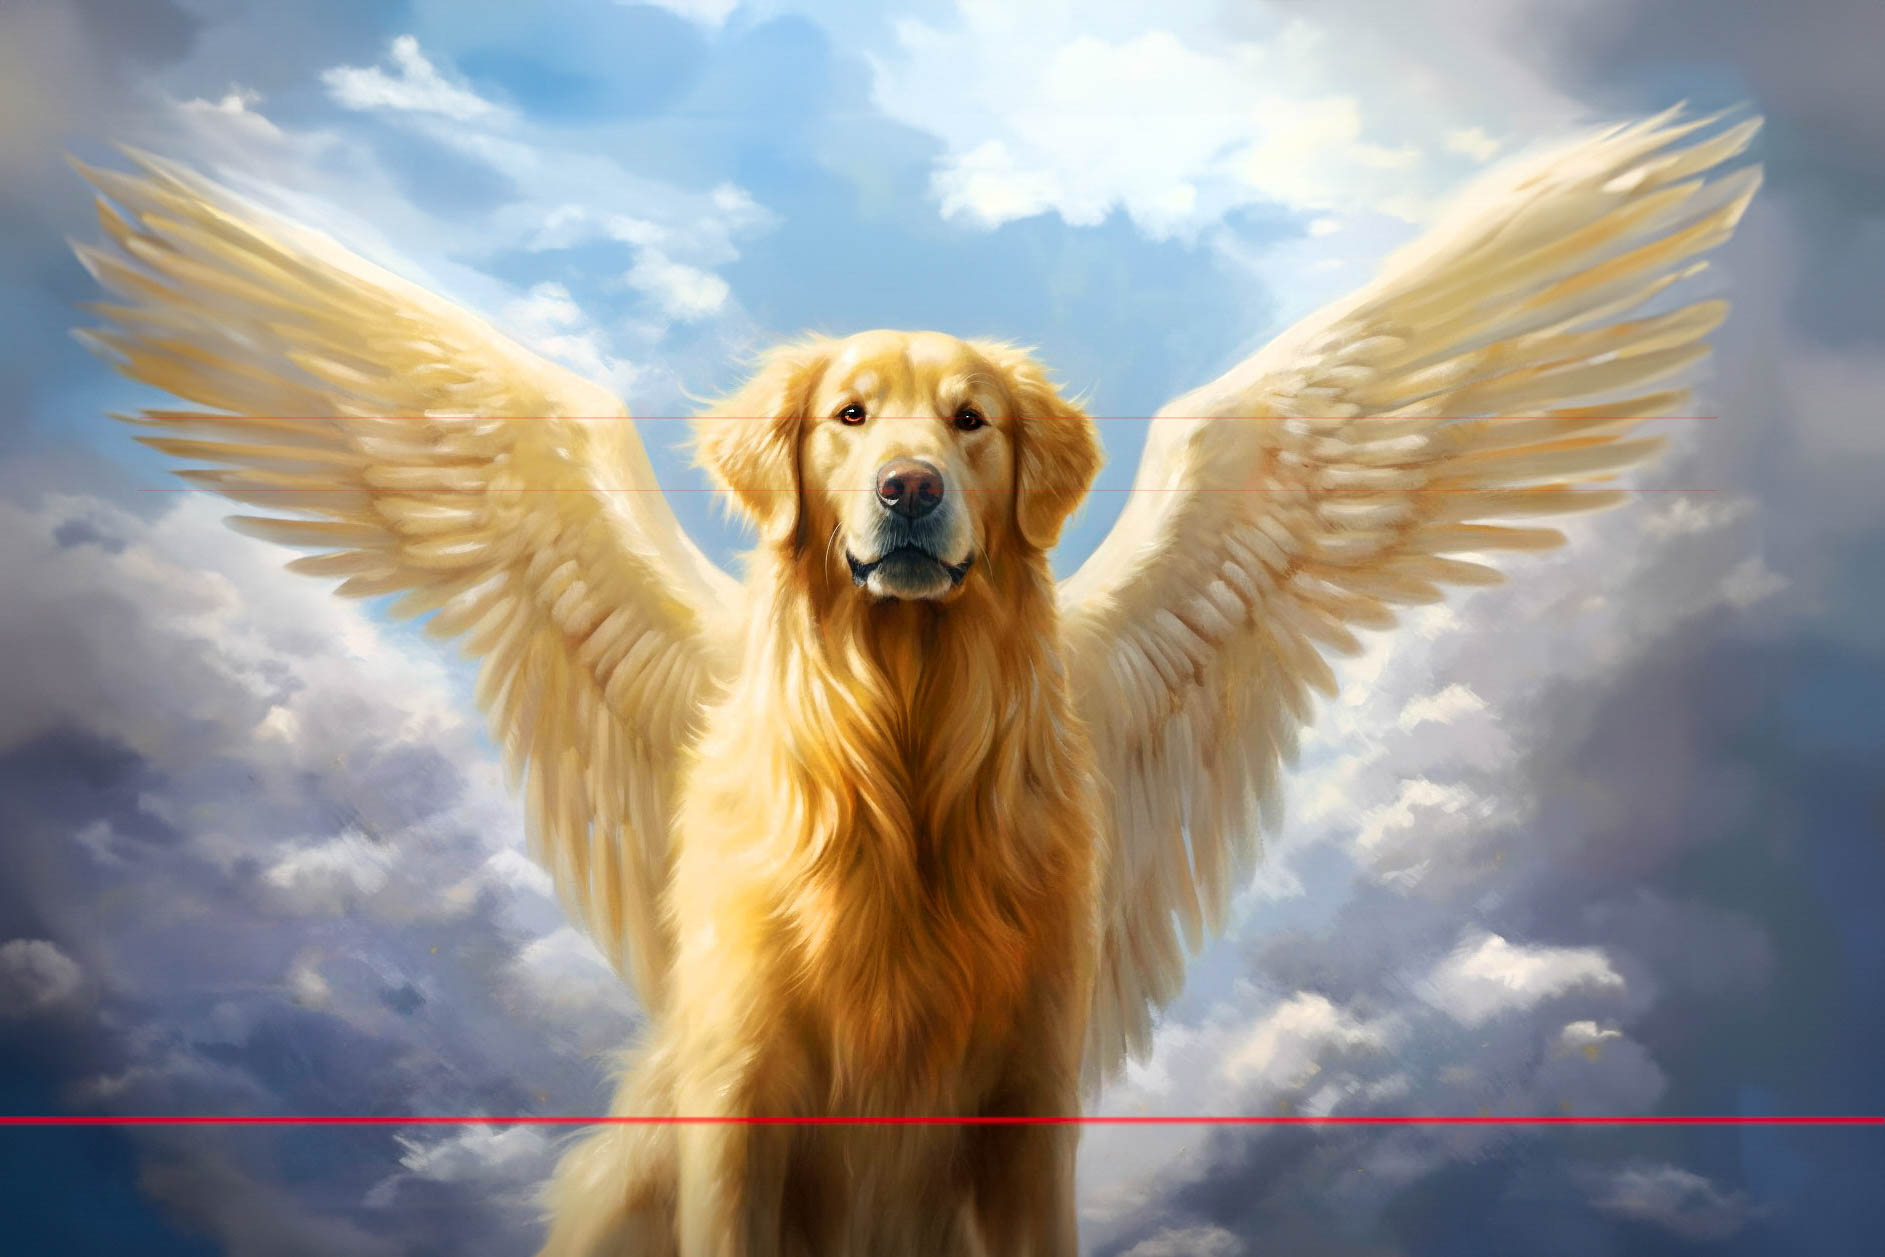 A picture of a golden retriever with large, feathered angel wings stands against a backdrop of a bright, cloudy sky. The wings are spread wide, giving a majestic and ethereal appearance. The dog gazes forward with a serene and noble expression, imparting a sense of peace and divinity.